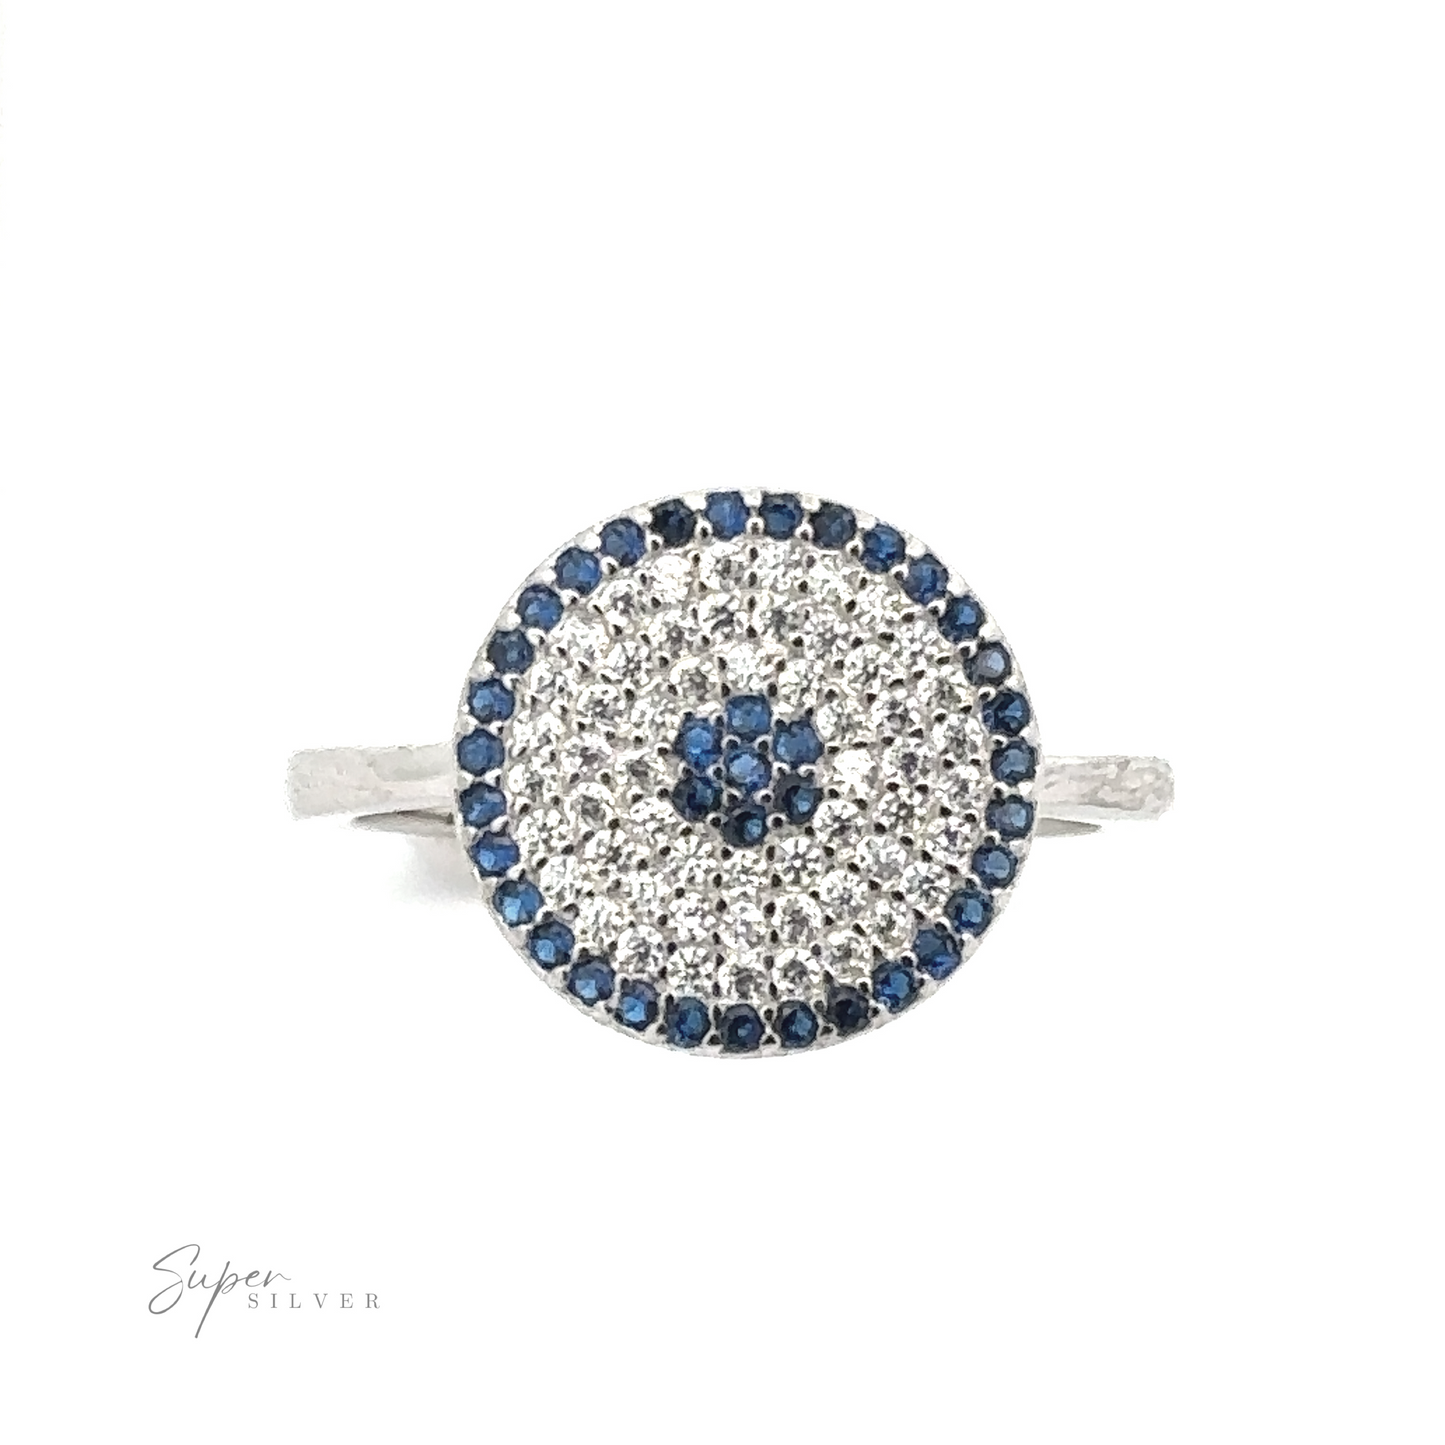 Cubic Zirconia Evil Eye Ring with a circular design featuring blue and clear cubic zirconia gemstones, arranged in concentric patterns reminiscent of an evil eye. The branding "Super Silver" is visible in the bottom left corner.